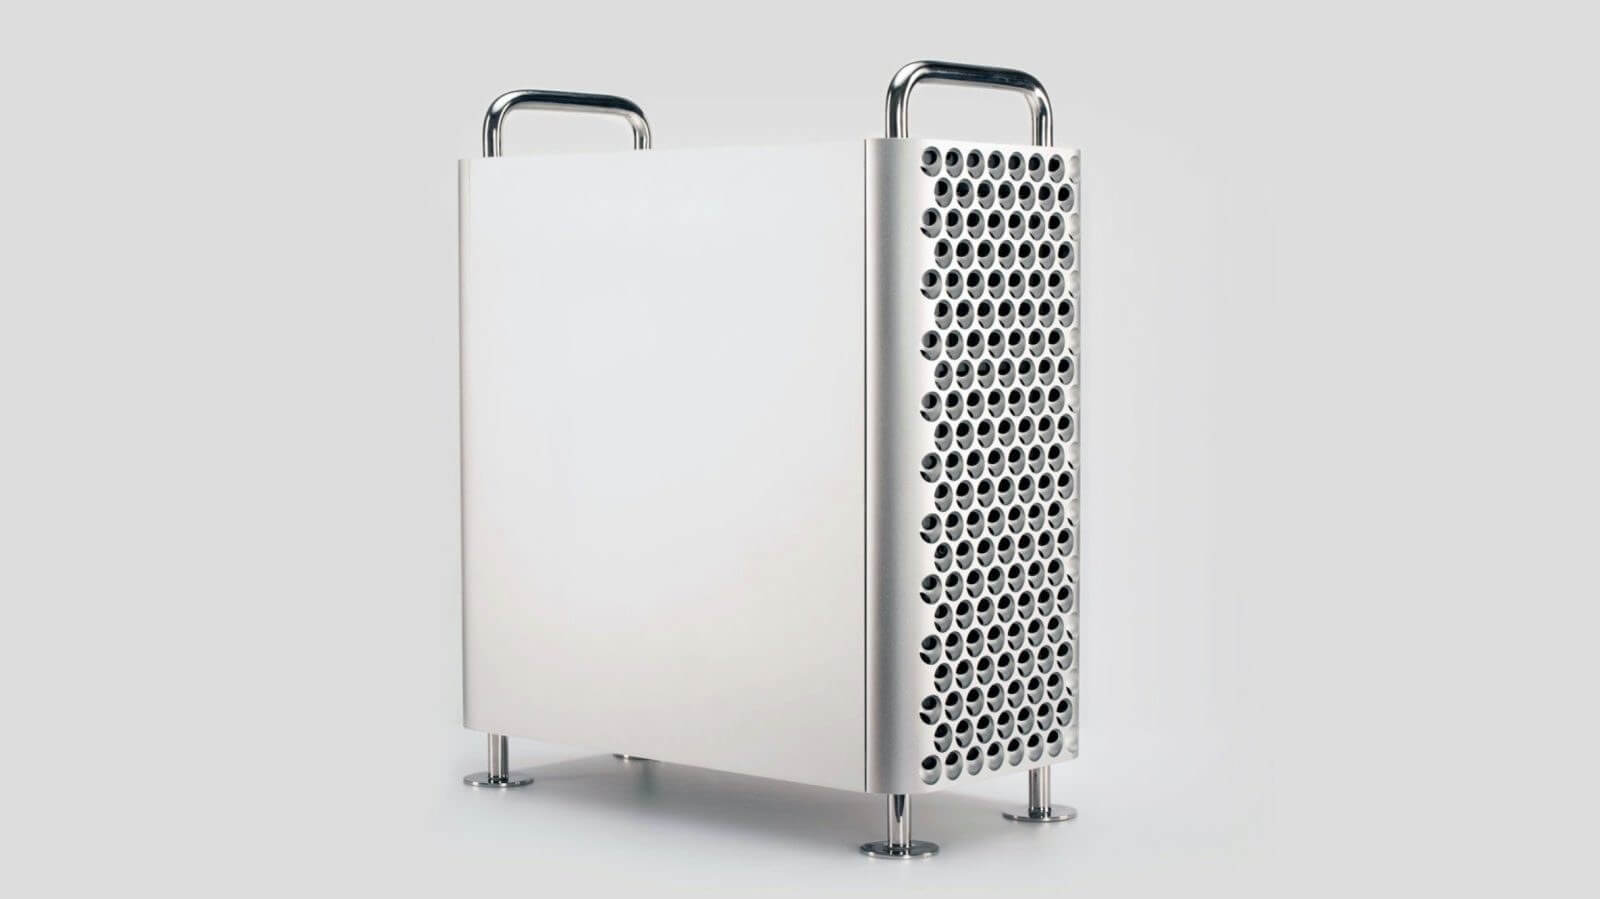 Give your PC the Mac Pro look with this case